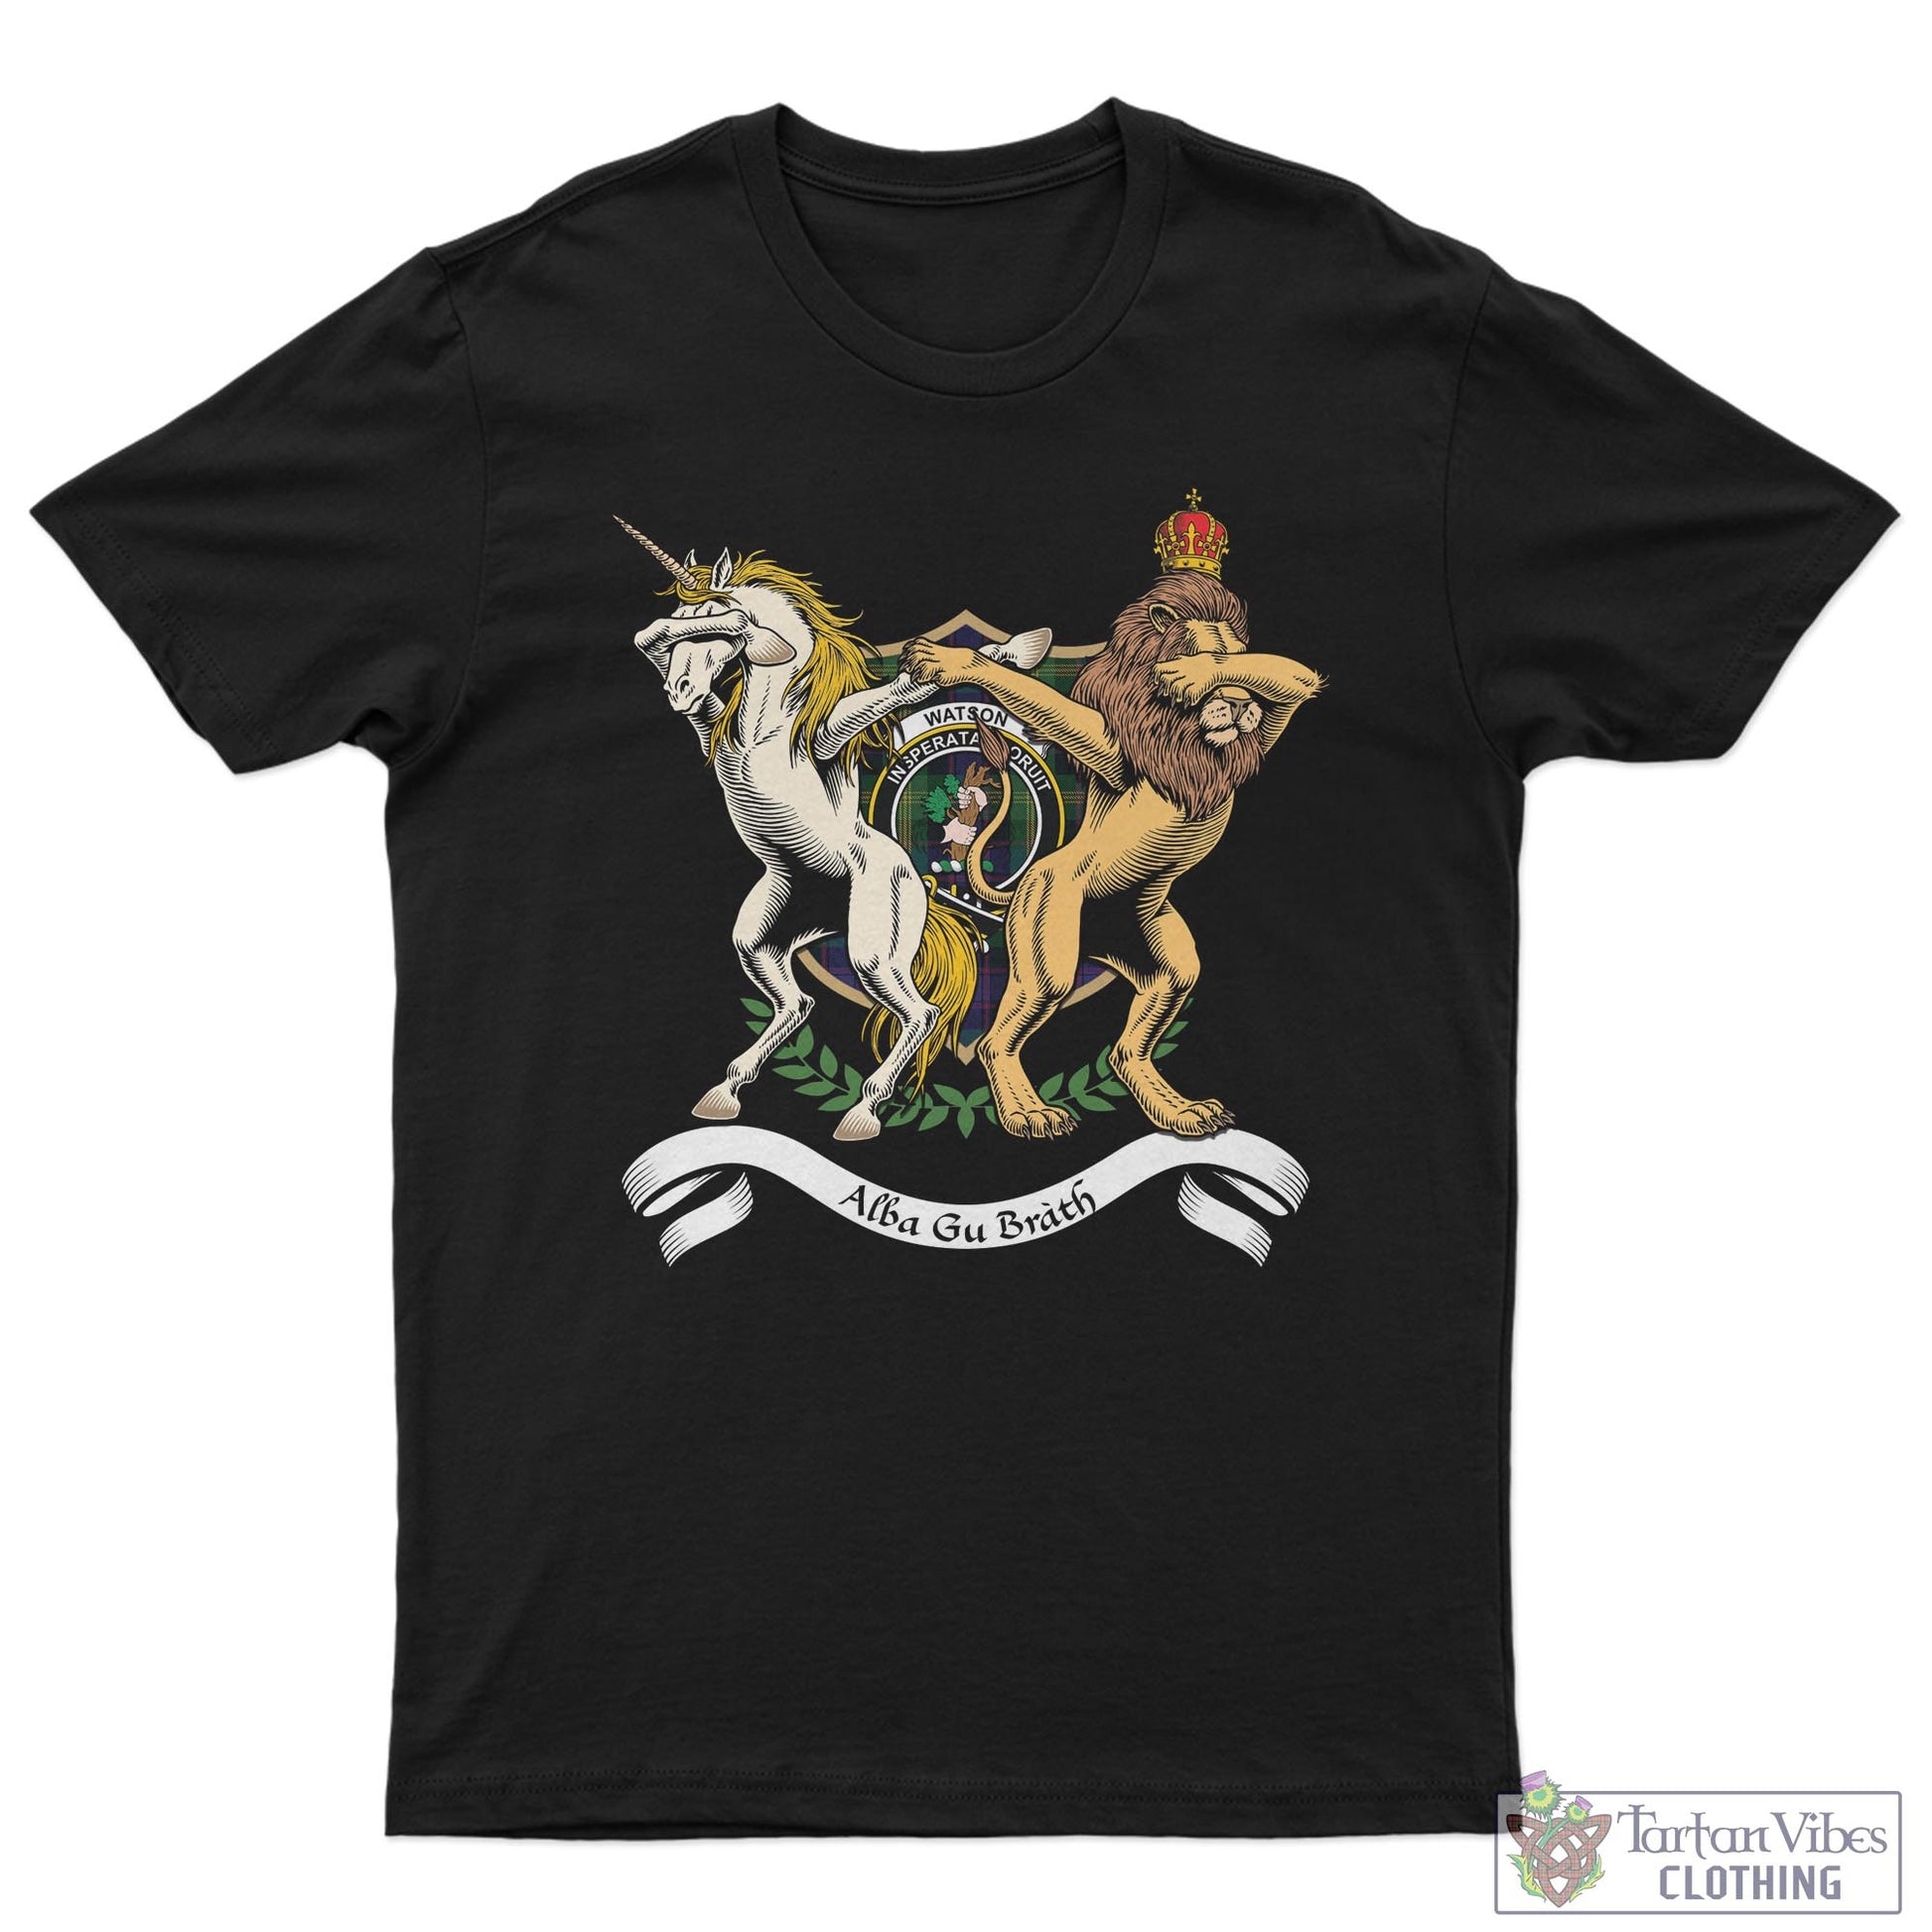 Tartan Vibes Clothing Watson Family Crest Cotton Men's T-Shirt with Scotland Royal Coat Of Arm Funny Style